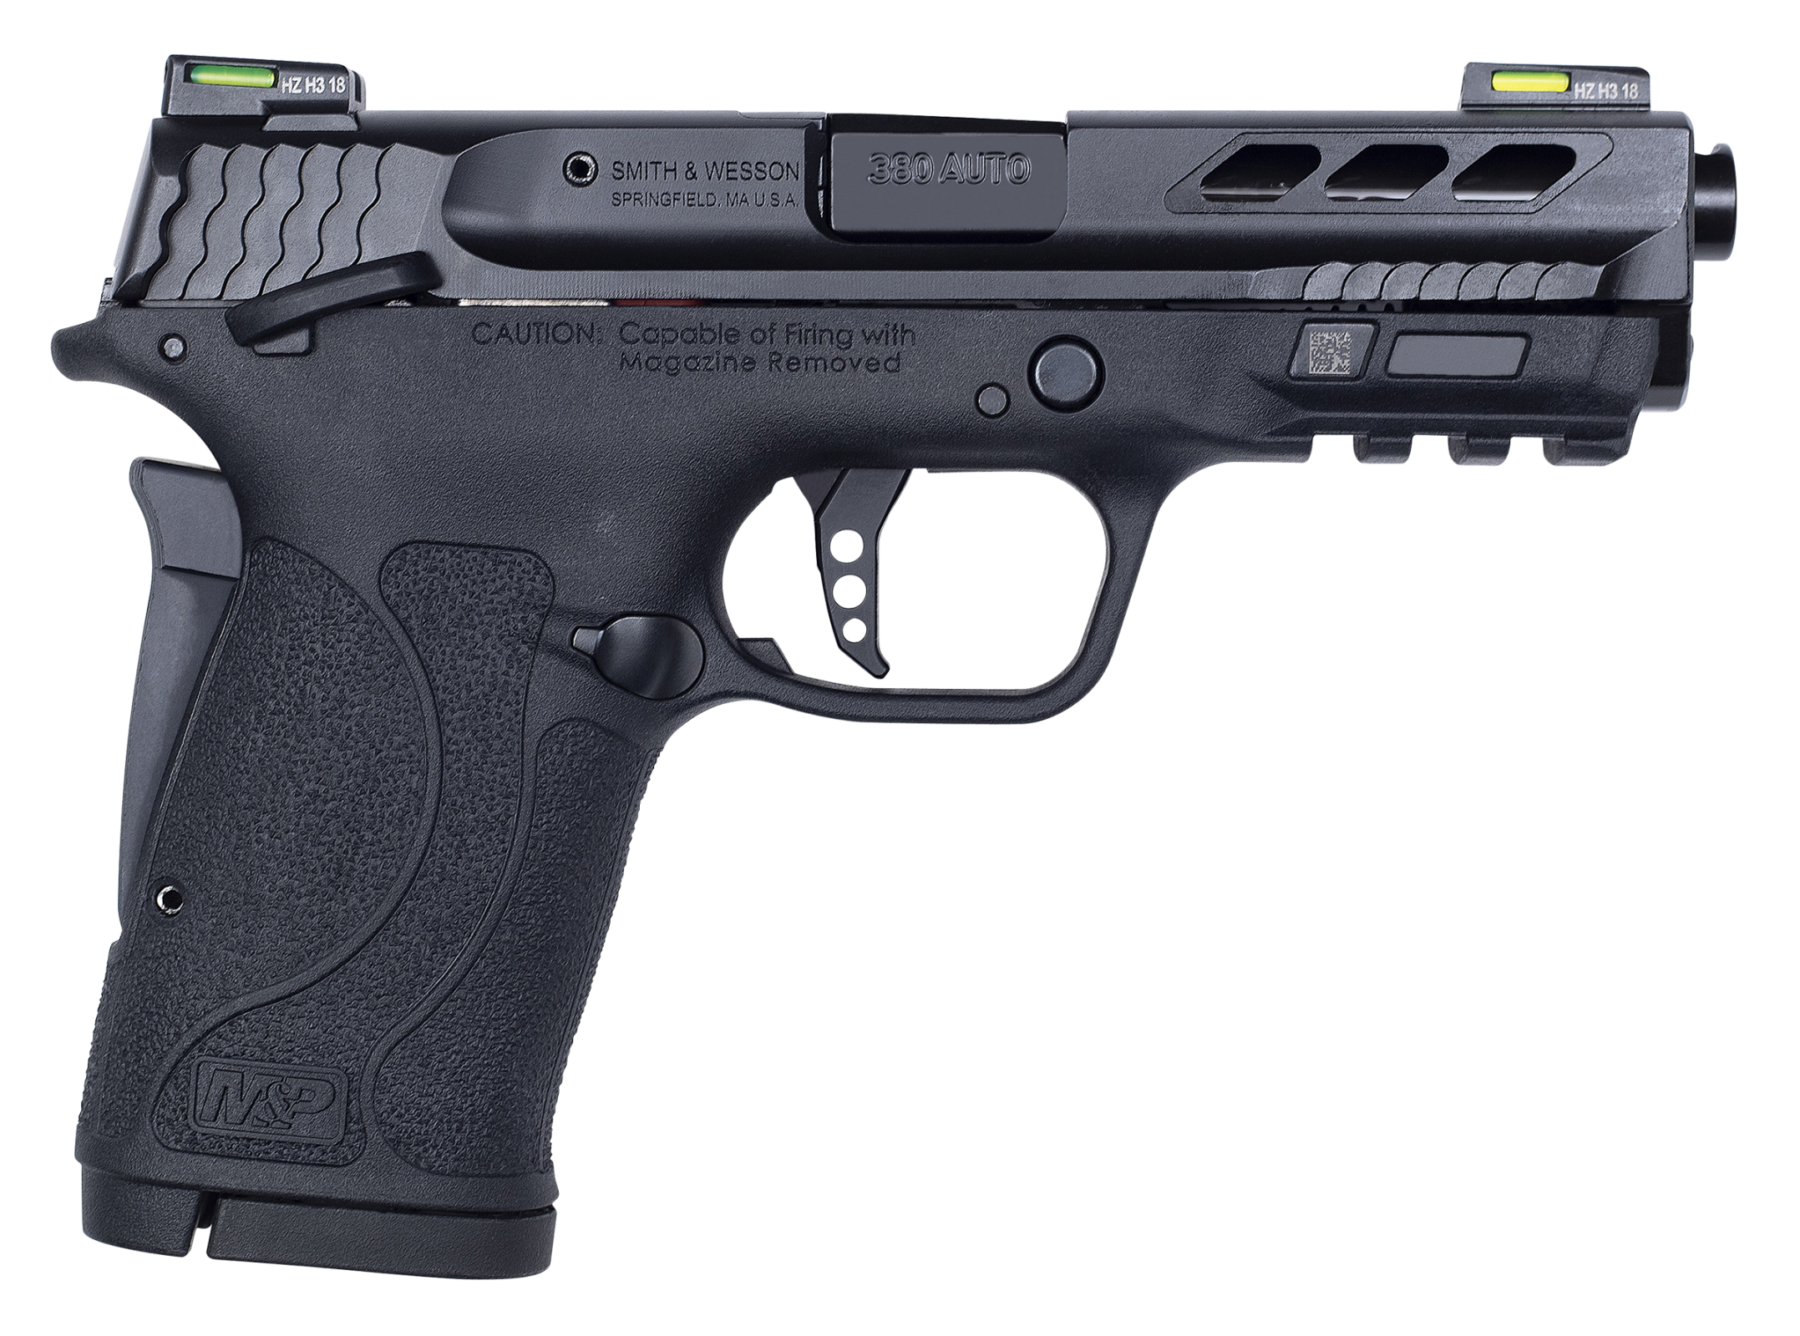 Smith & Wesson Performance Center M&P 380 SHIELD